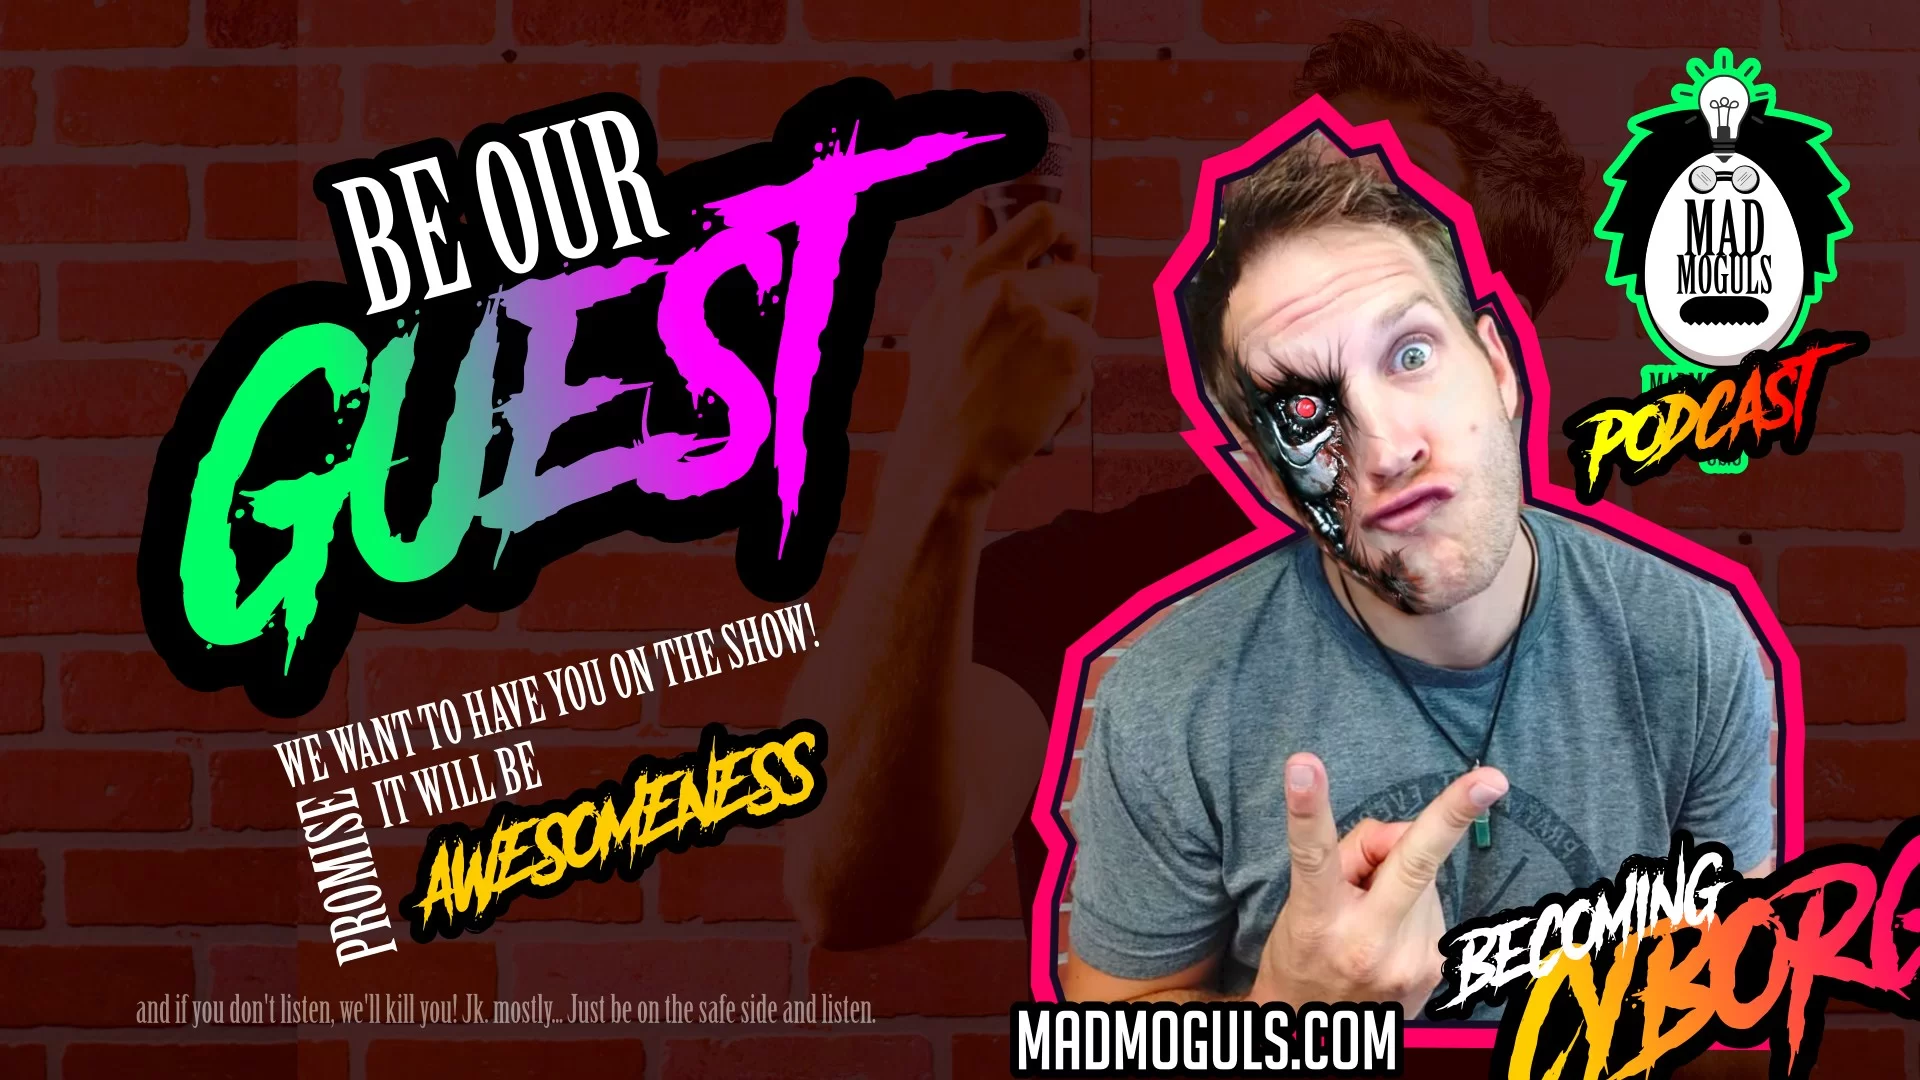 Mad moguls graphic design | be our guest by 702 pros